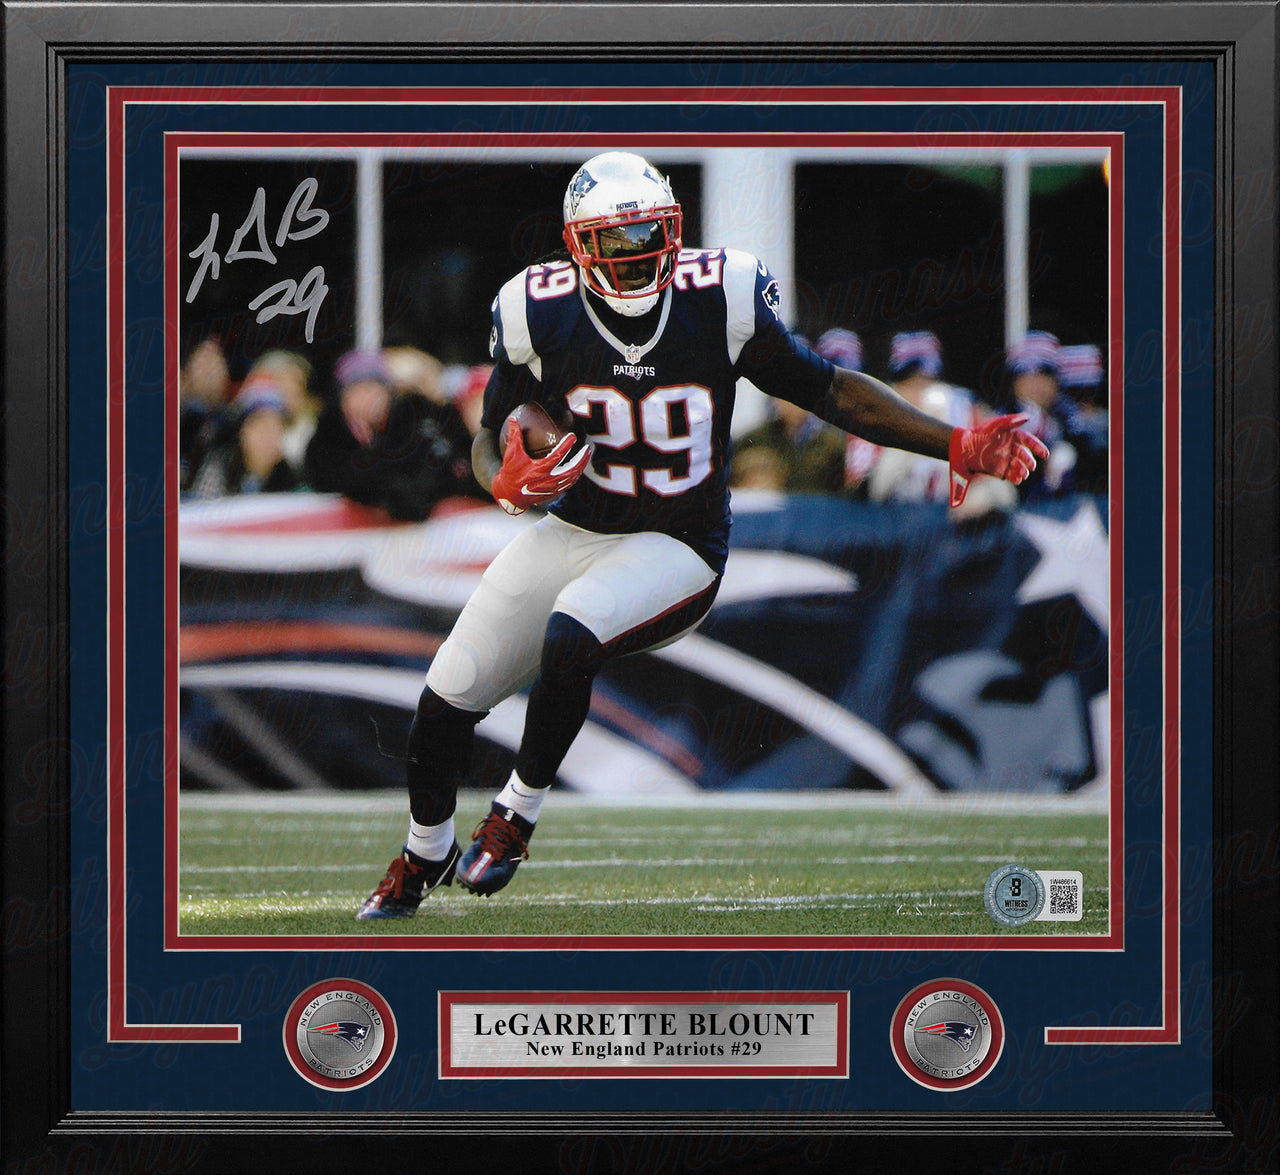 LeGarrette Blount in Action Autographed New England Patriots 11" x 14" Framed Football Photo